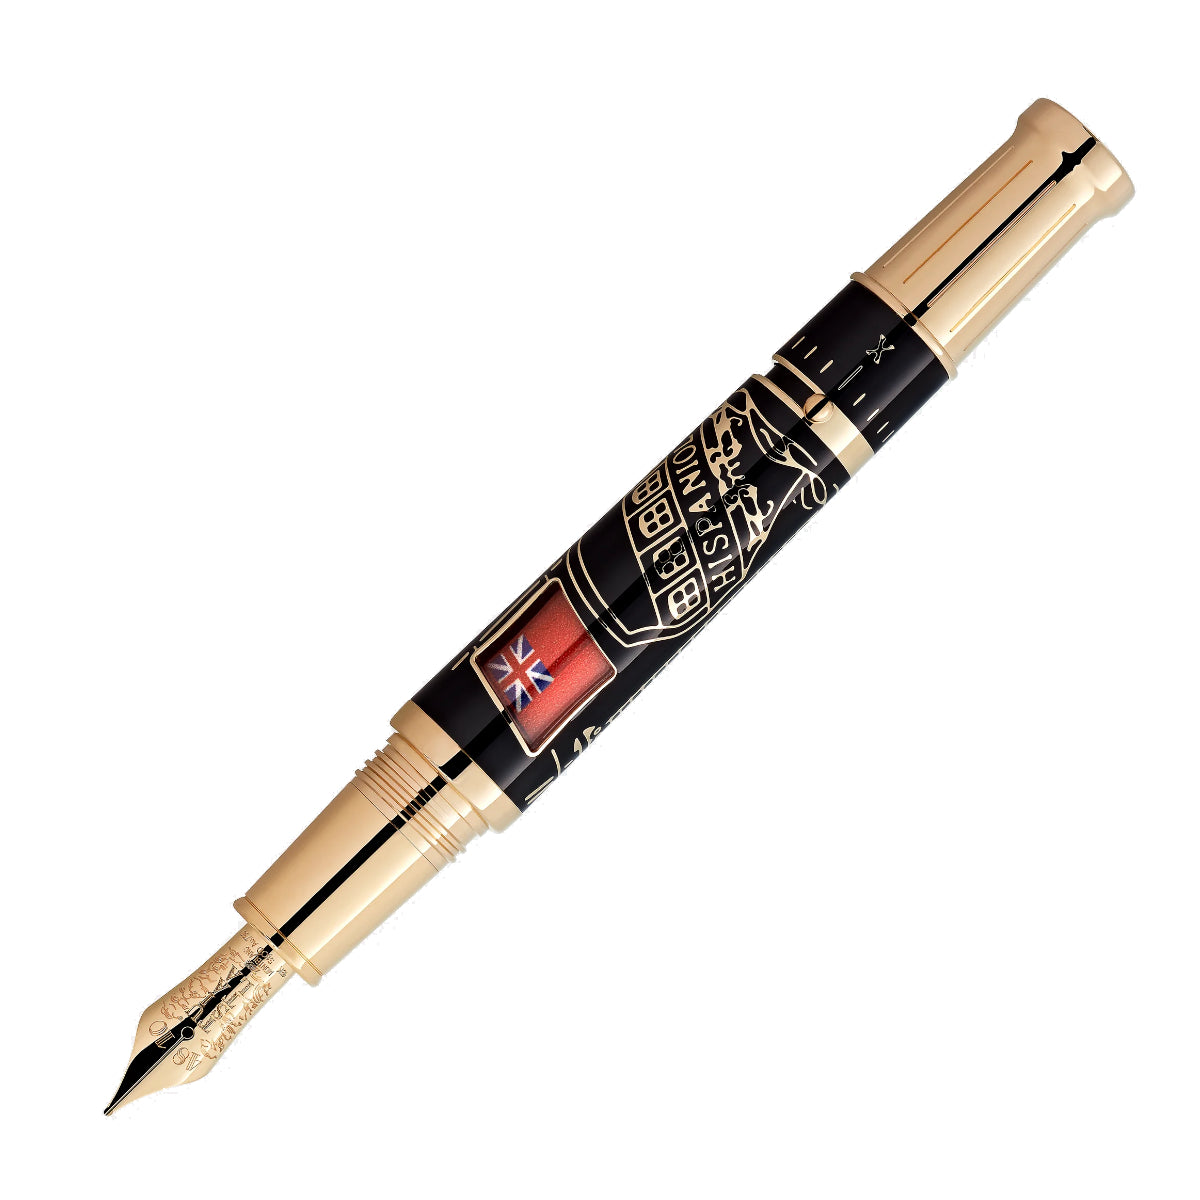 Stylo plume Writers Edition Hommage à Robert Louis Stevenson Limited Edition 1883